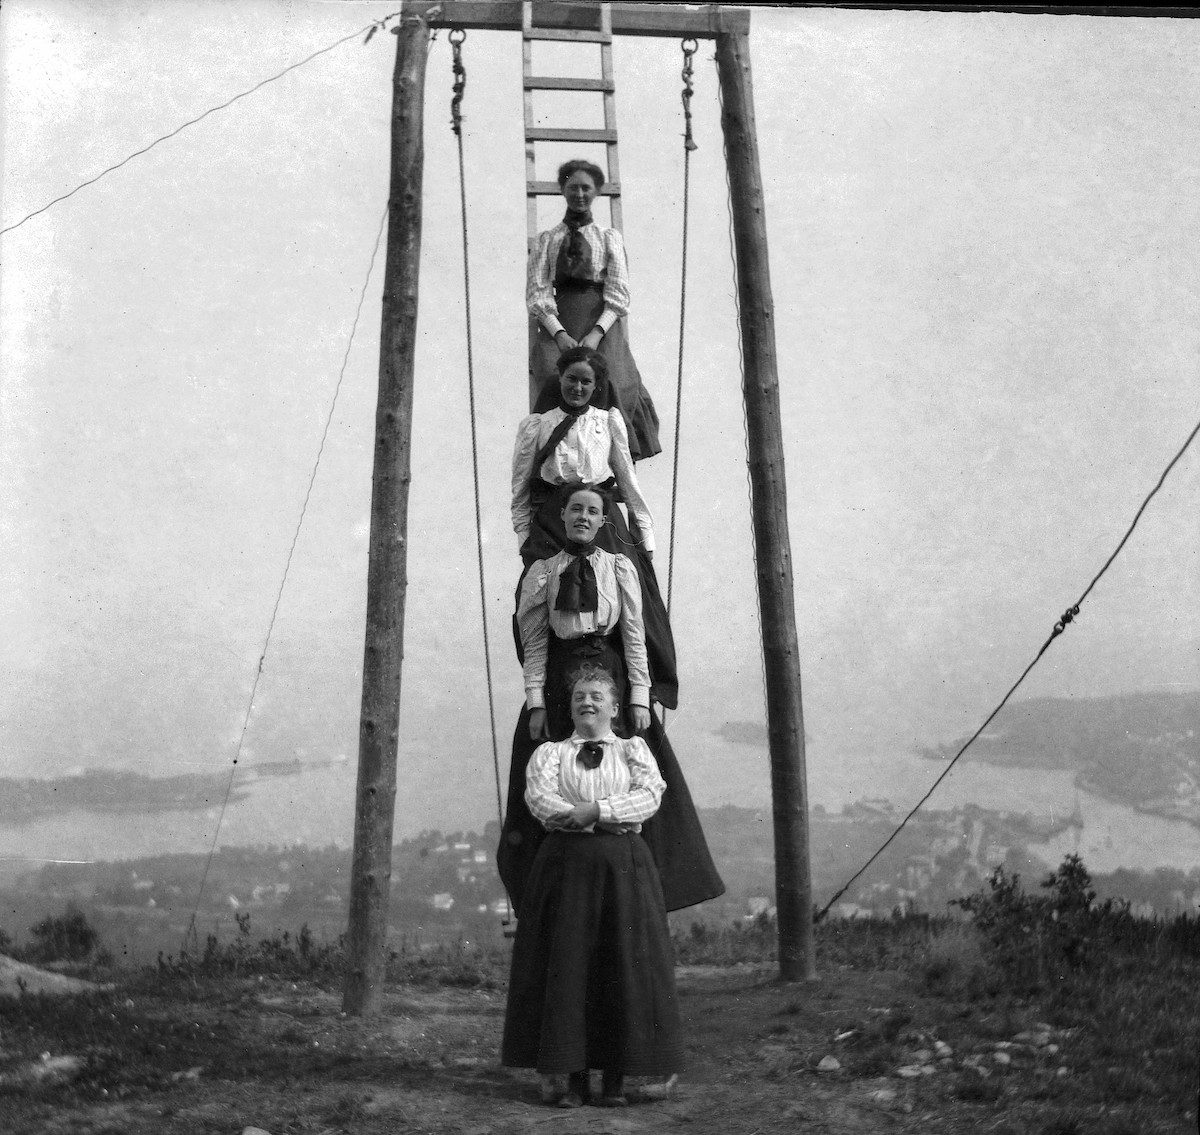 Friends and family of Theresa Babb perched on a ladder by the Summit House swing on August 17, 1898.